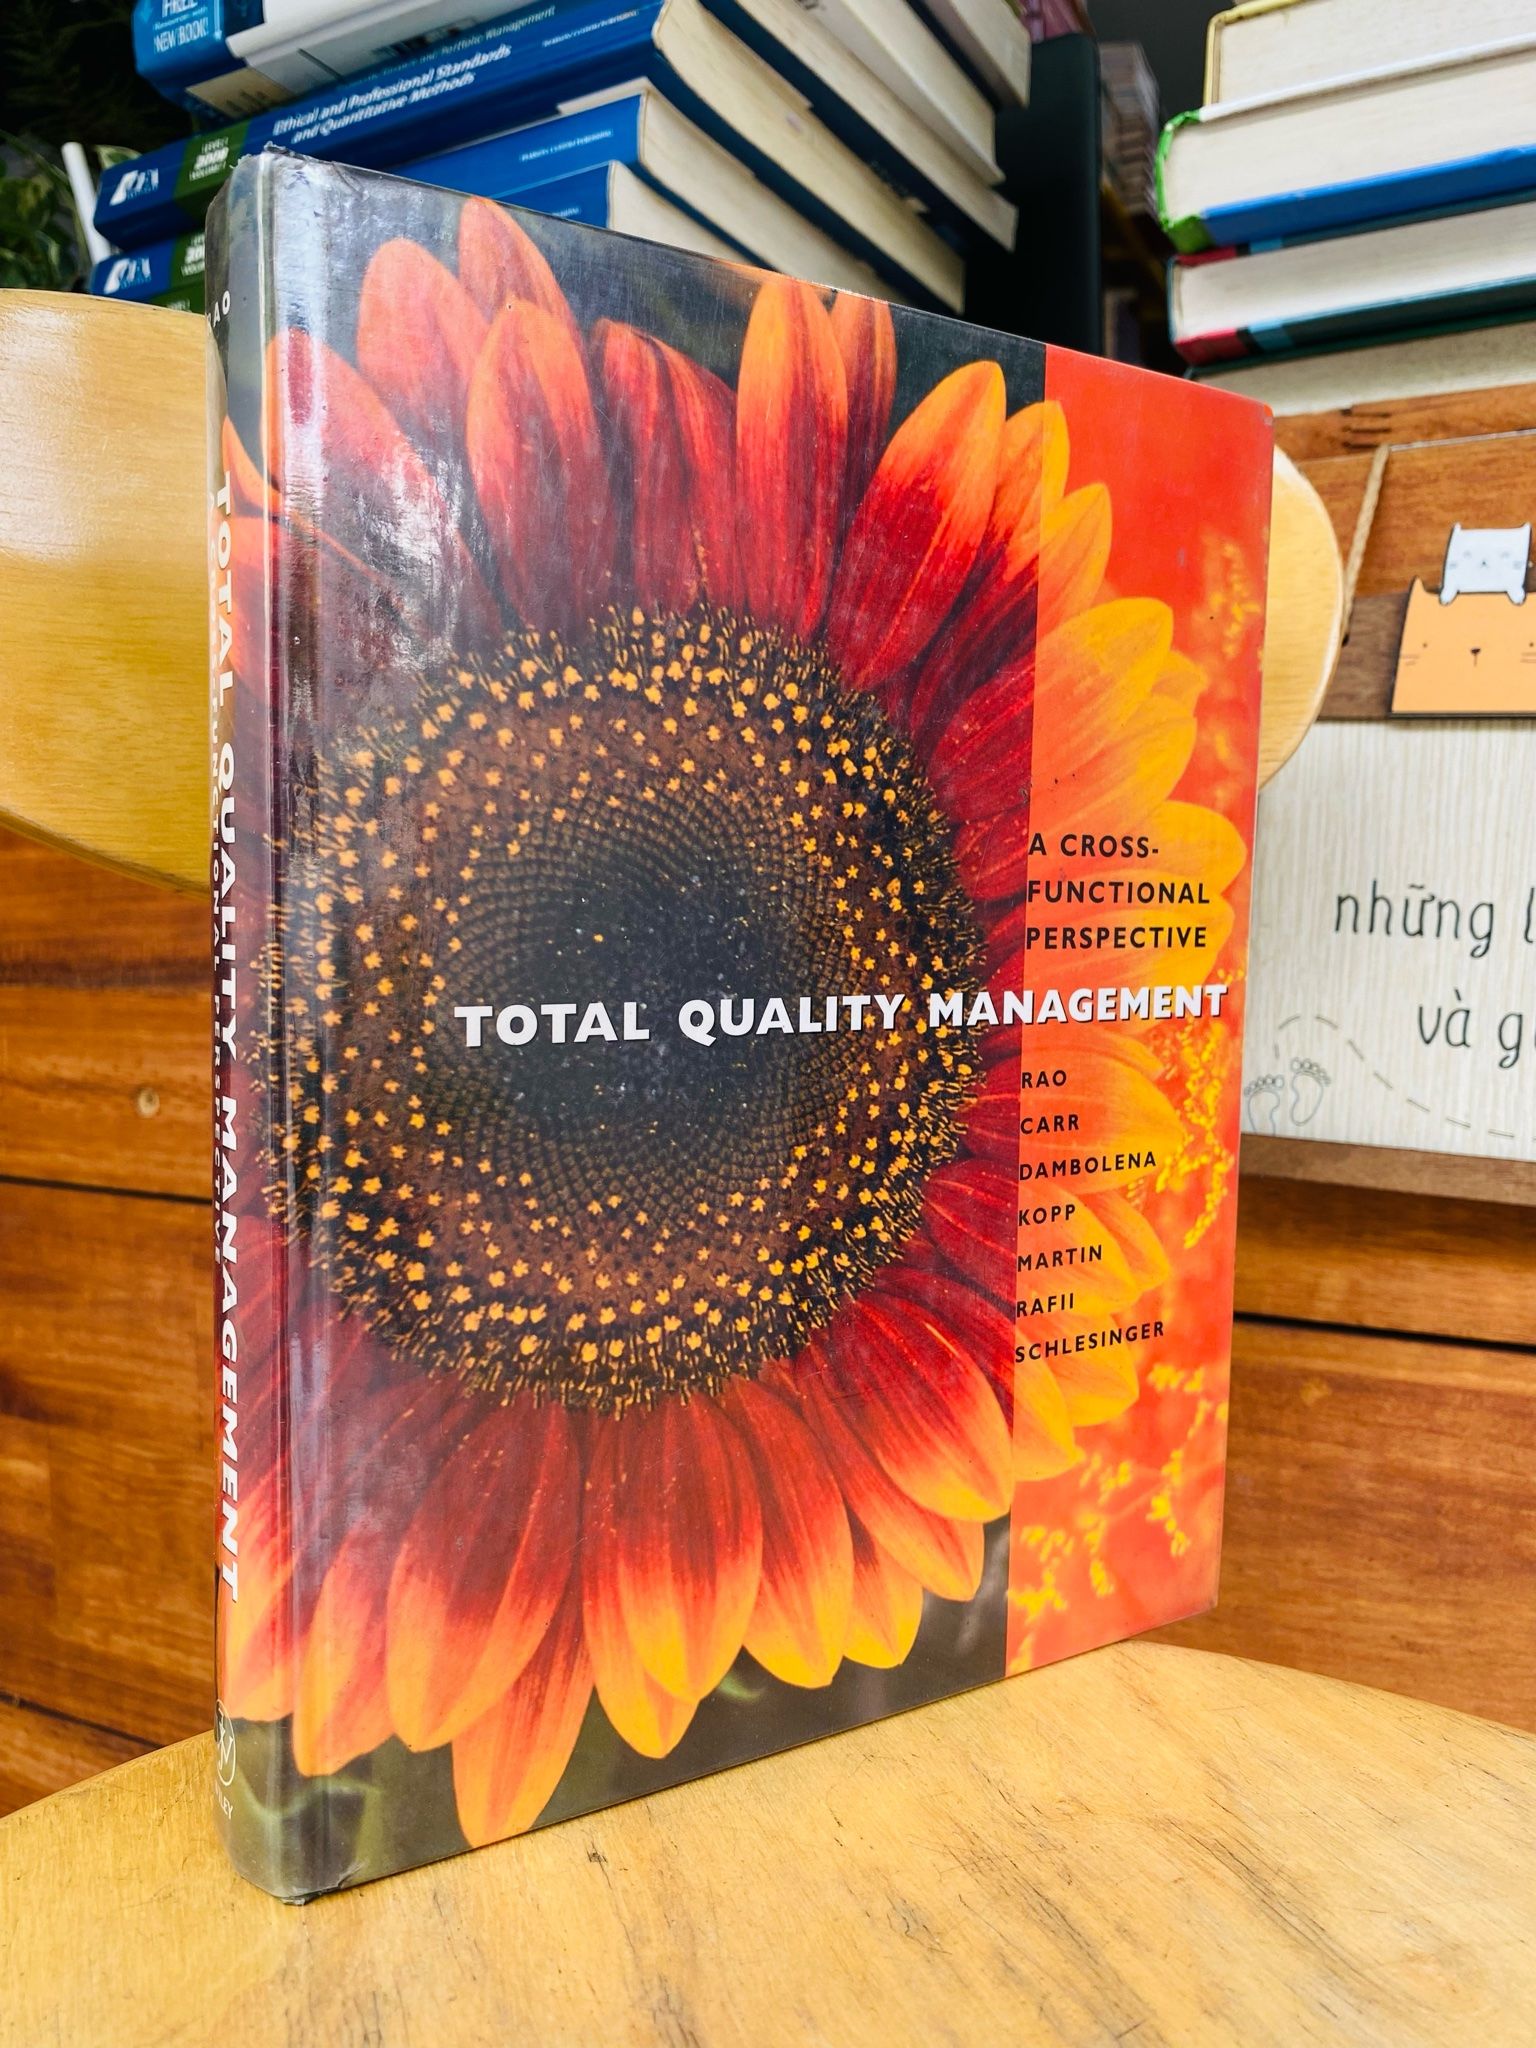  TOTAL QUALITY MANAGEMENT: A CROSS-FUNCTIONAL PERSPECTIVE 